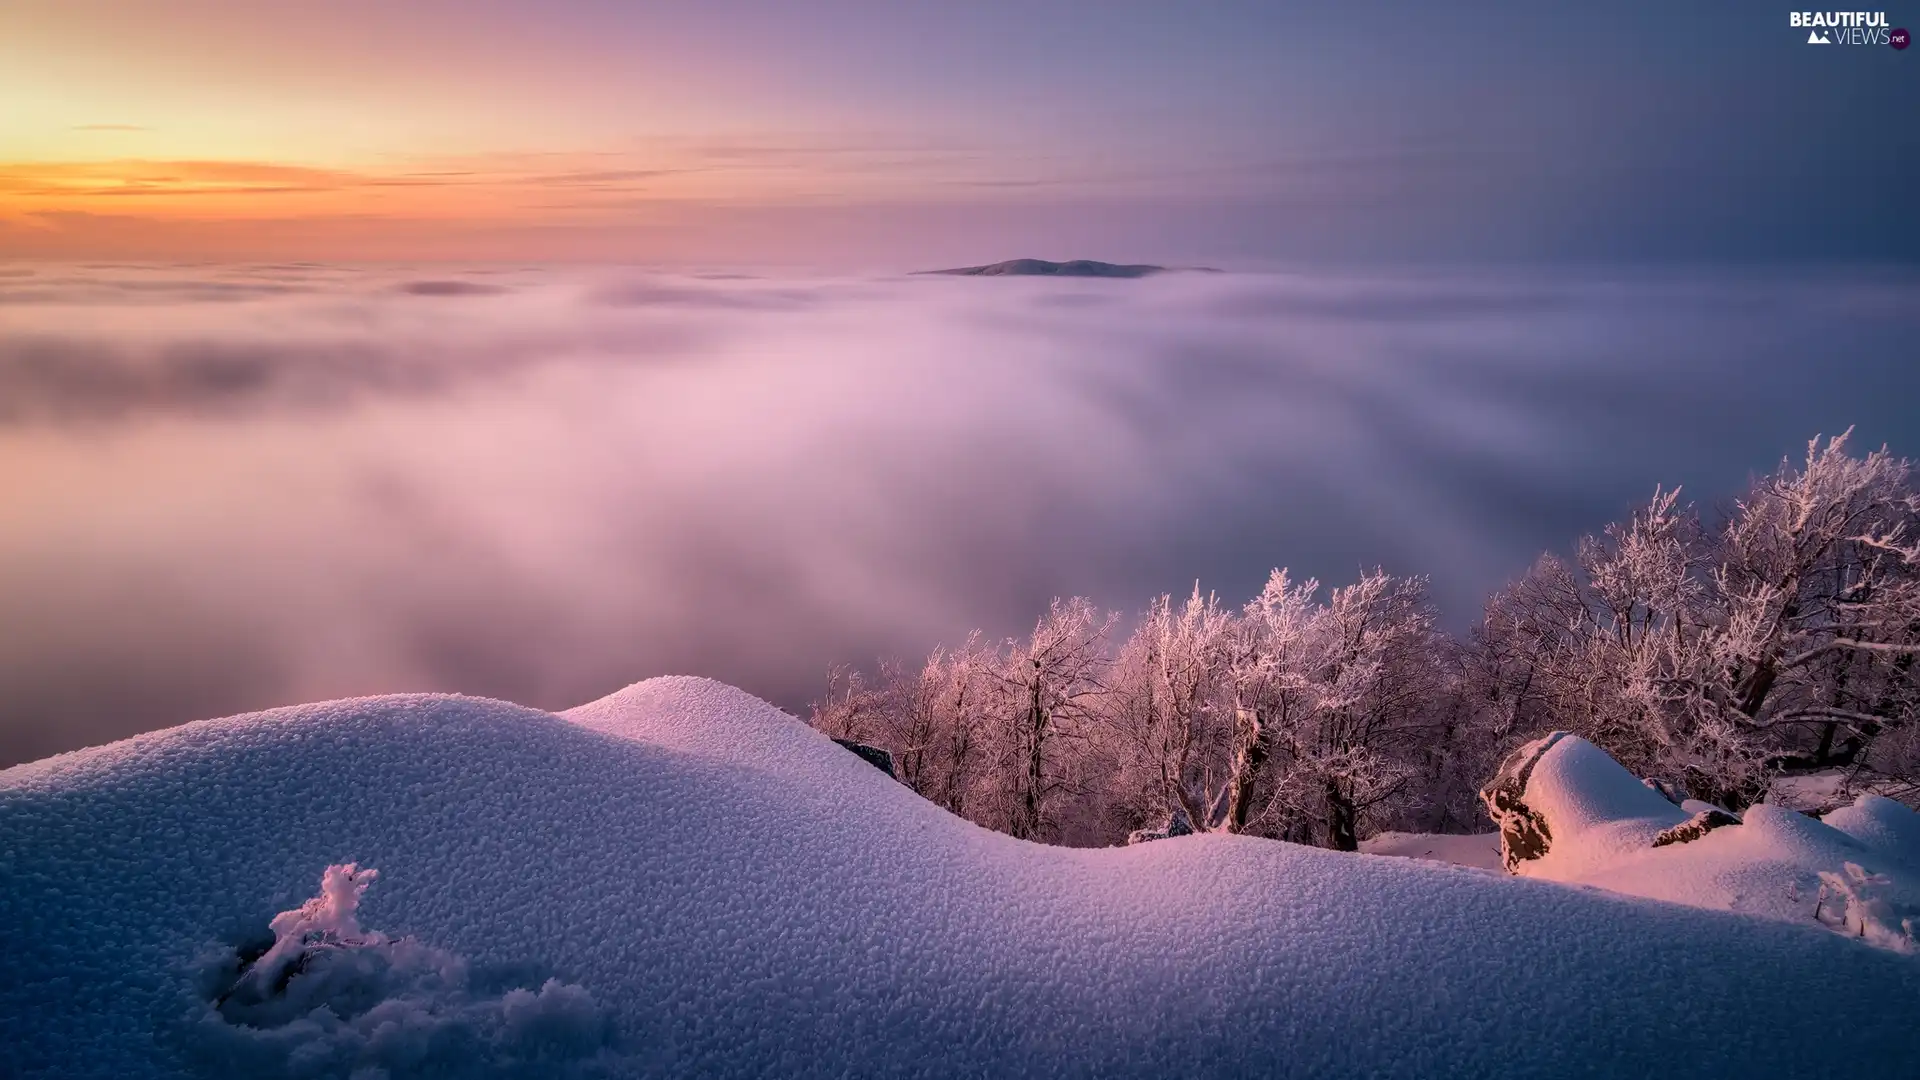 Mountains, Fog, Sunrise, clouds, viewes, snow, winter, trees